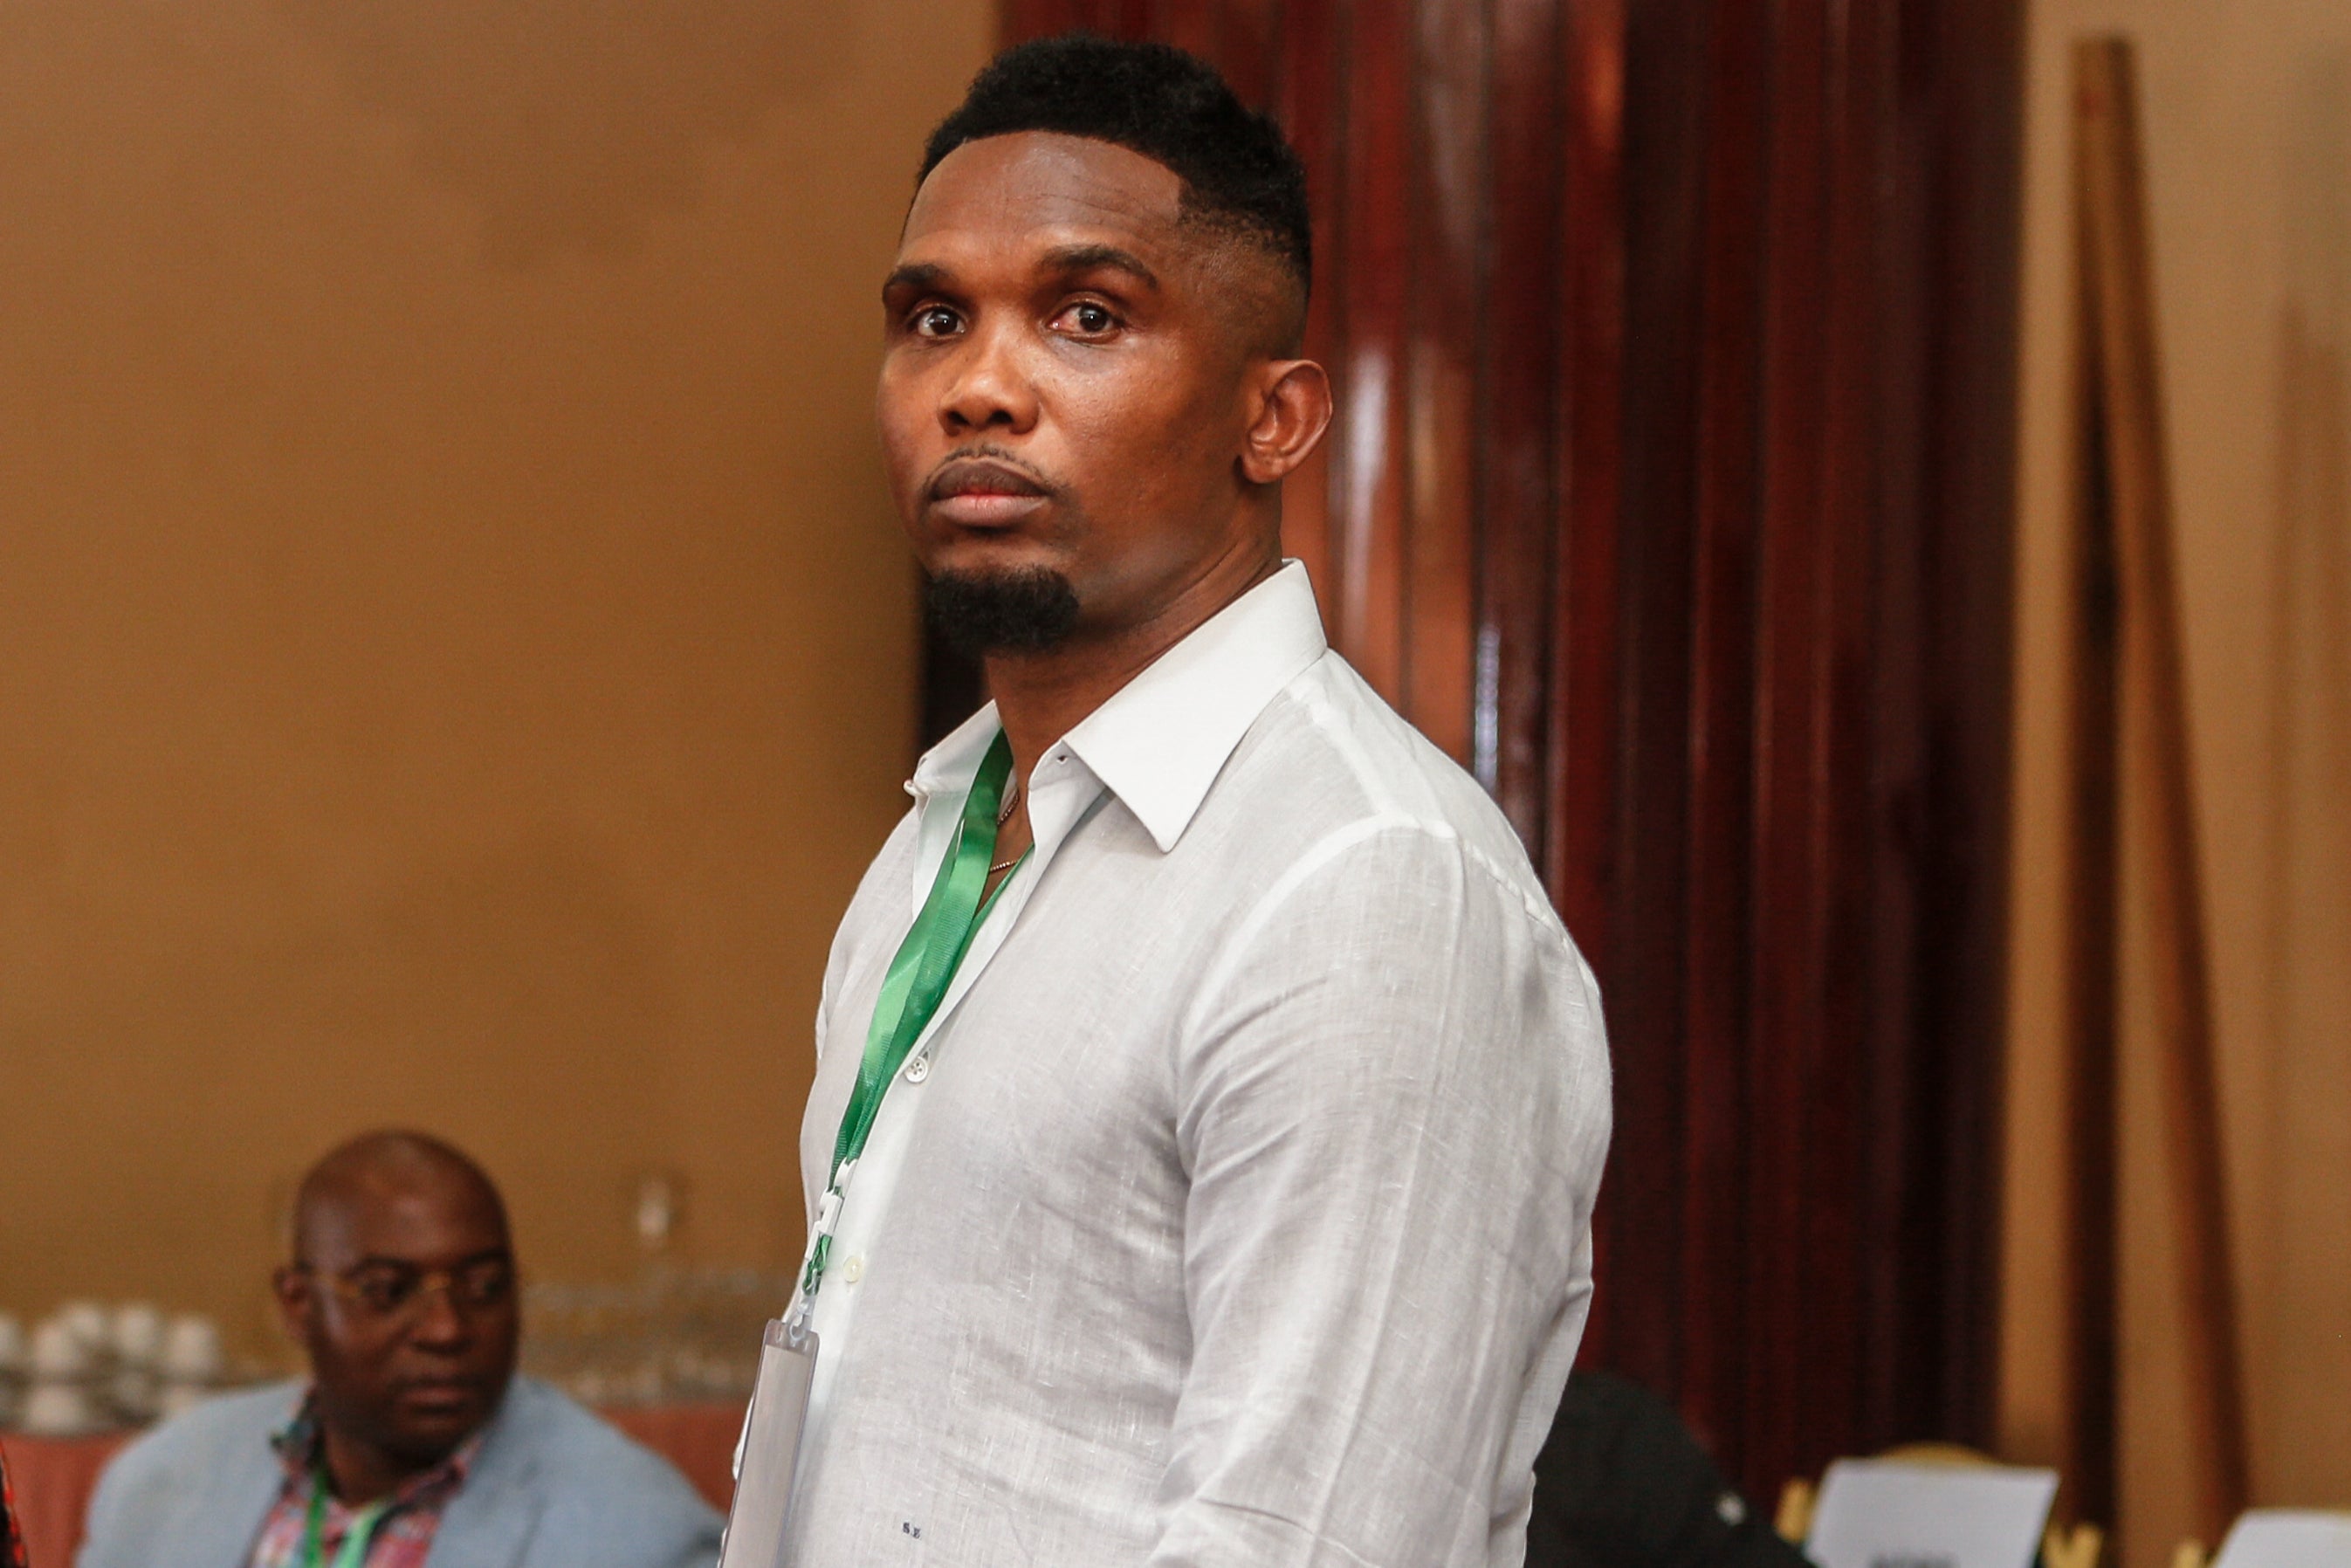 Samuel Eto’o’s resignation has been rejected by the Cameroon Football Federation